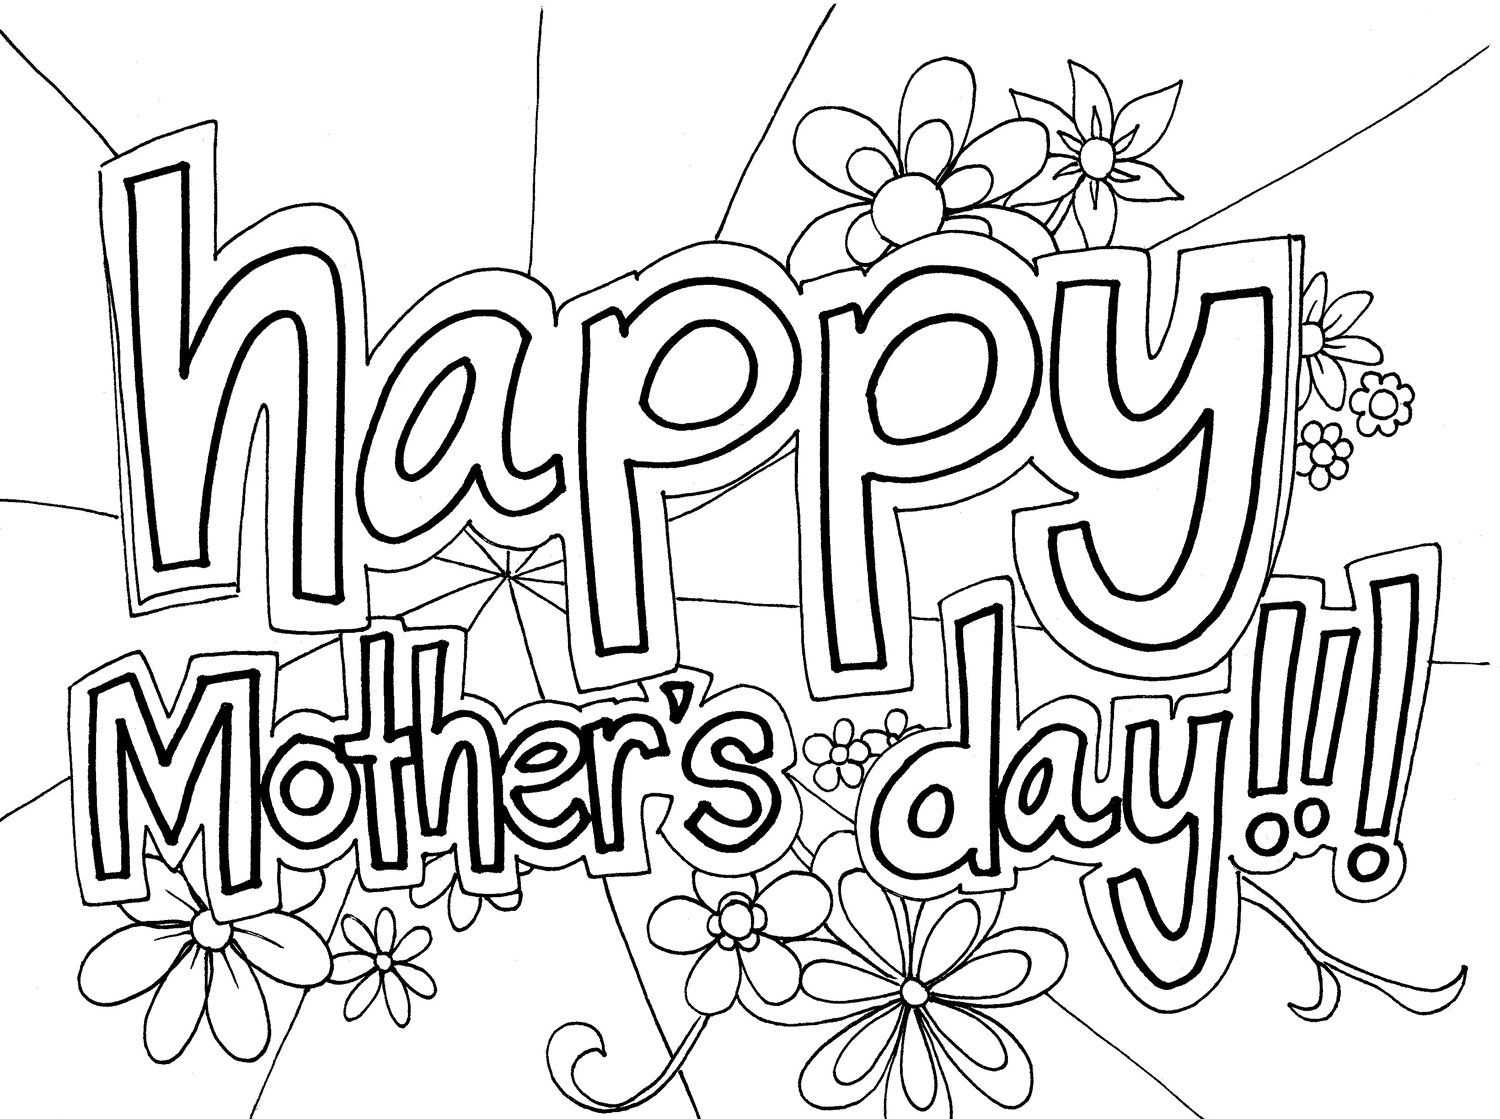 Happy Mothers Day Coloring Pages 2019 - Free Printable Calendar - Free Printable Mothers Day Coloring Cards